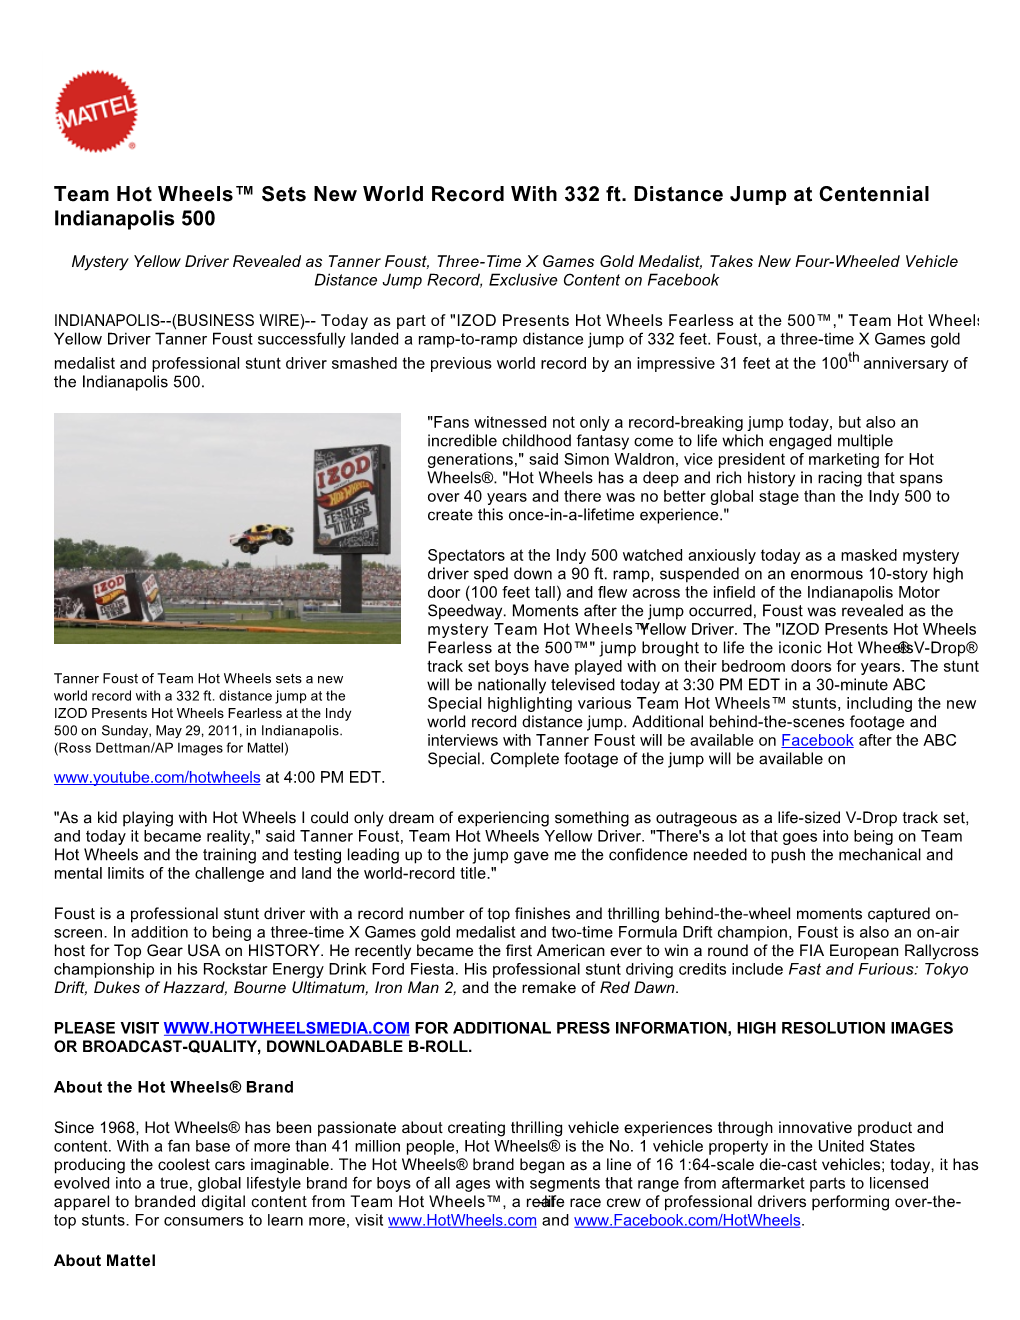 Team Hot Wheels™ Sets New World Record with 332 Ft. Distance Jump at Centennial Indianapolis 500